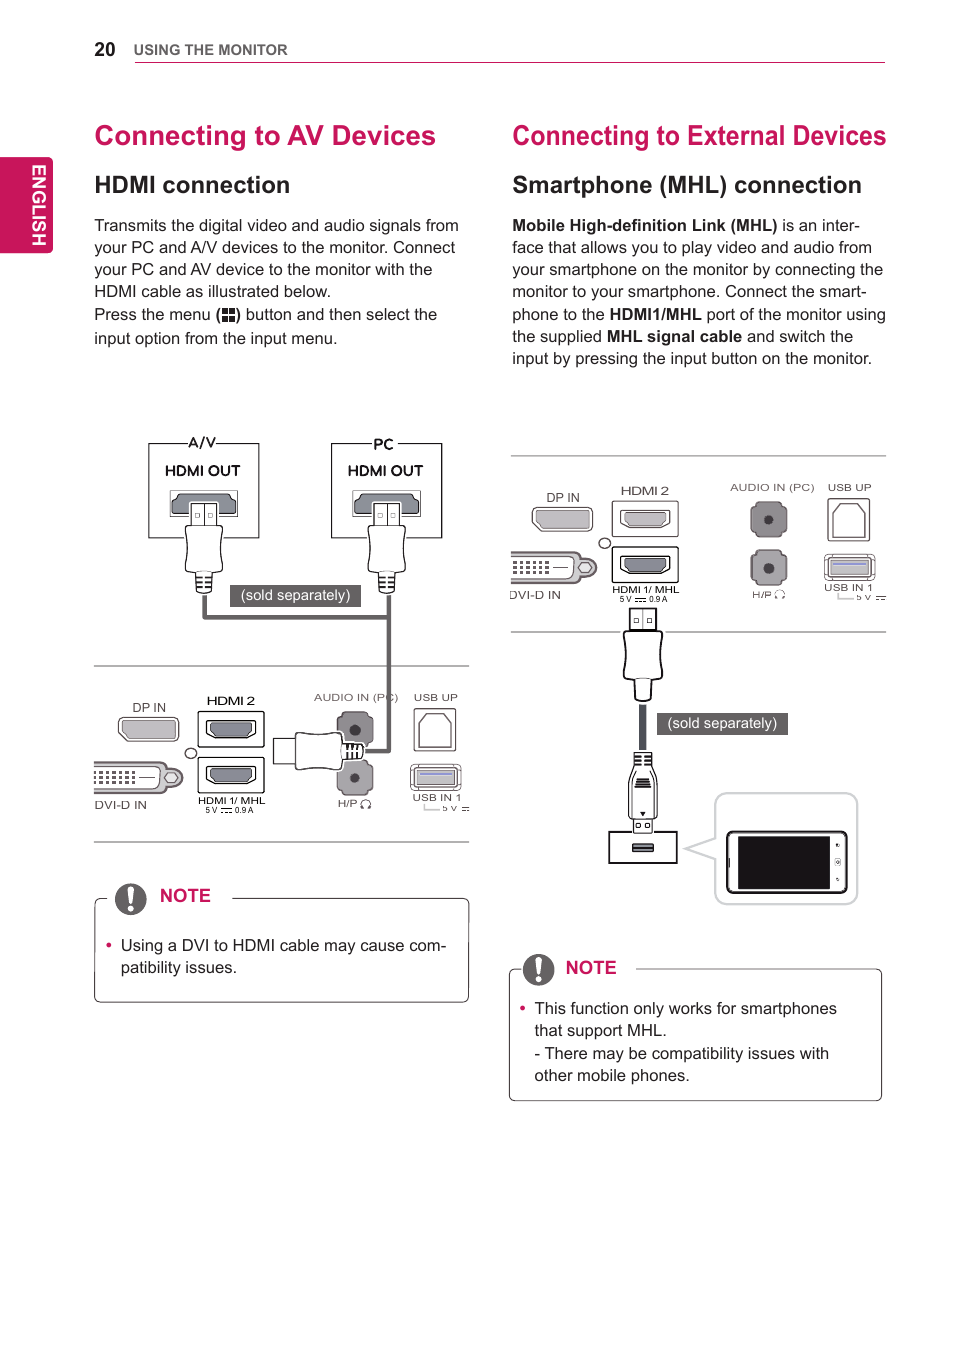 Connecting to av devices, Hdmi connection, Connecting to external devices | Smartphone (mhl) connection, 20 connecting to av devices 20, 20 connecting to external devices 20, English | LG 29EA73-P User Manual | Page 20 / 39